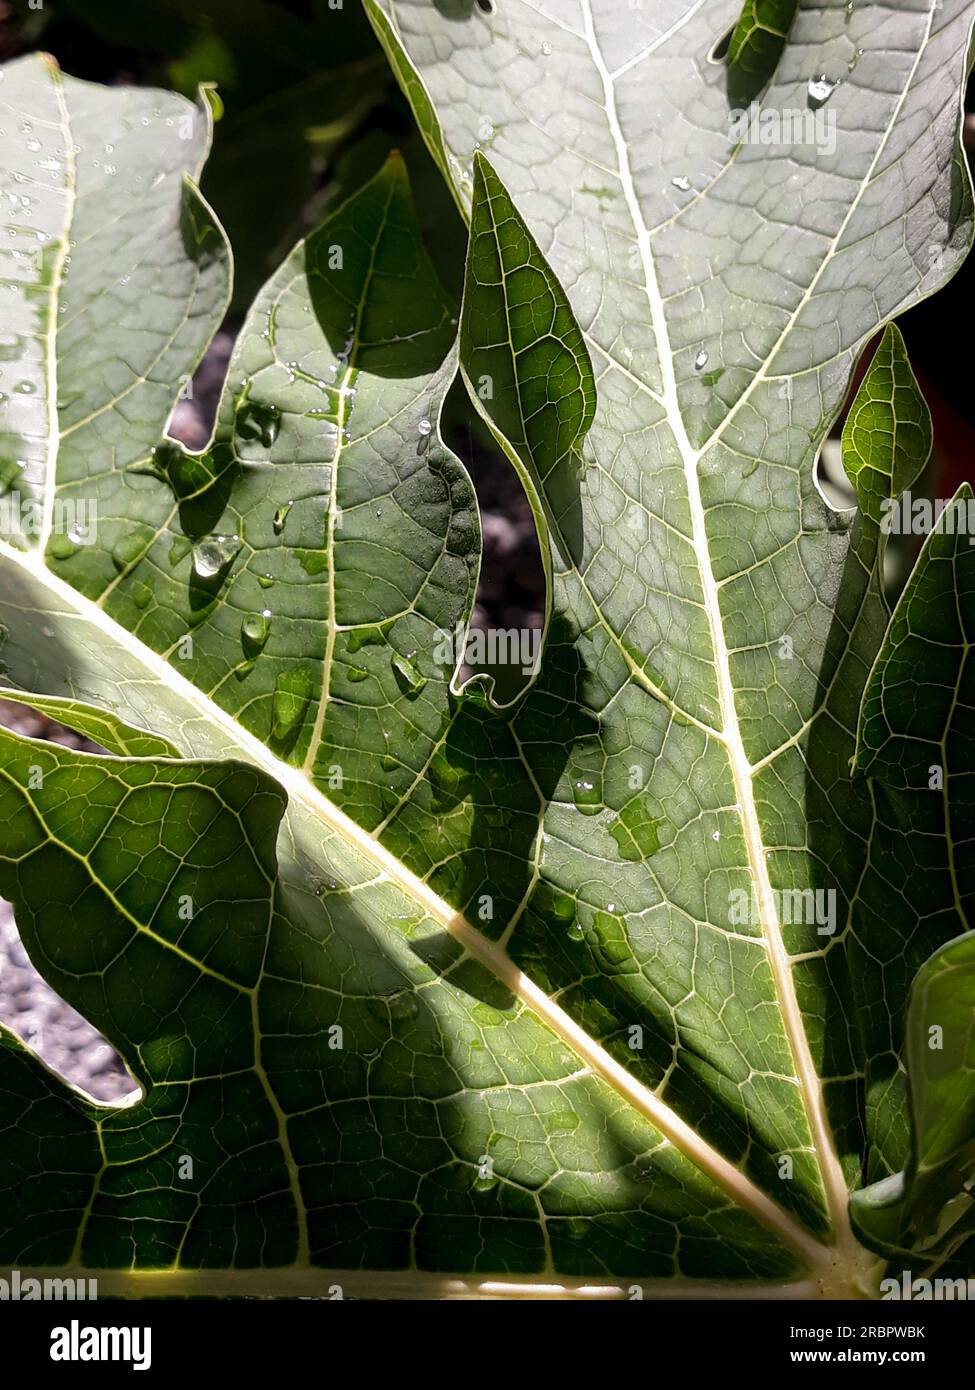 Wet Papaya Leaves in a rainy day at the garding Stock Photo - Alamy